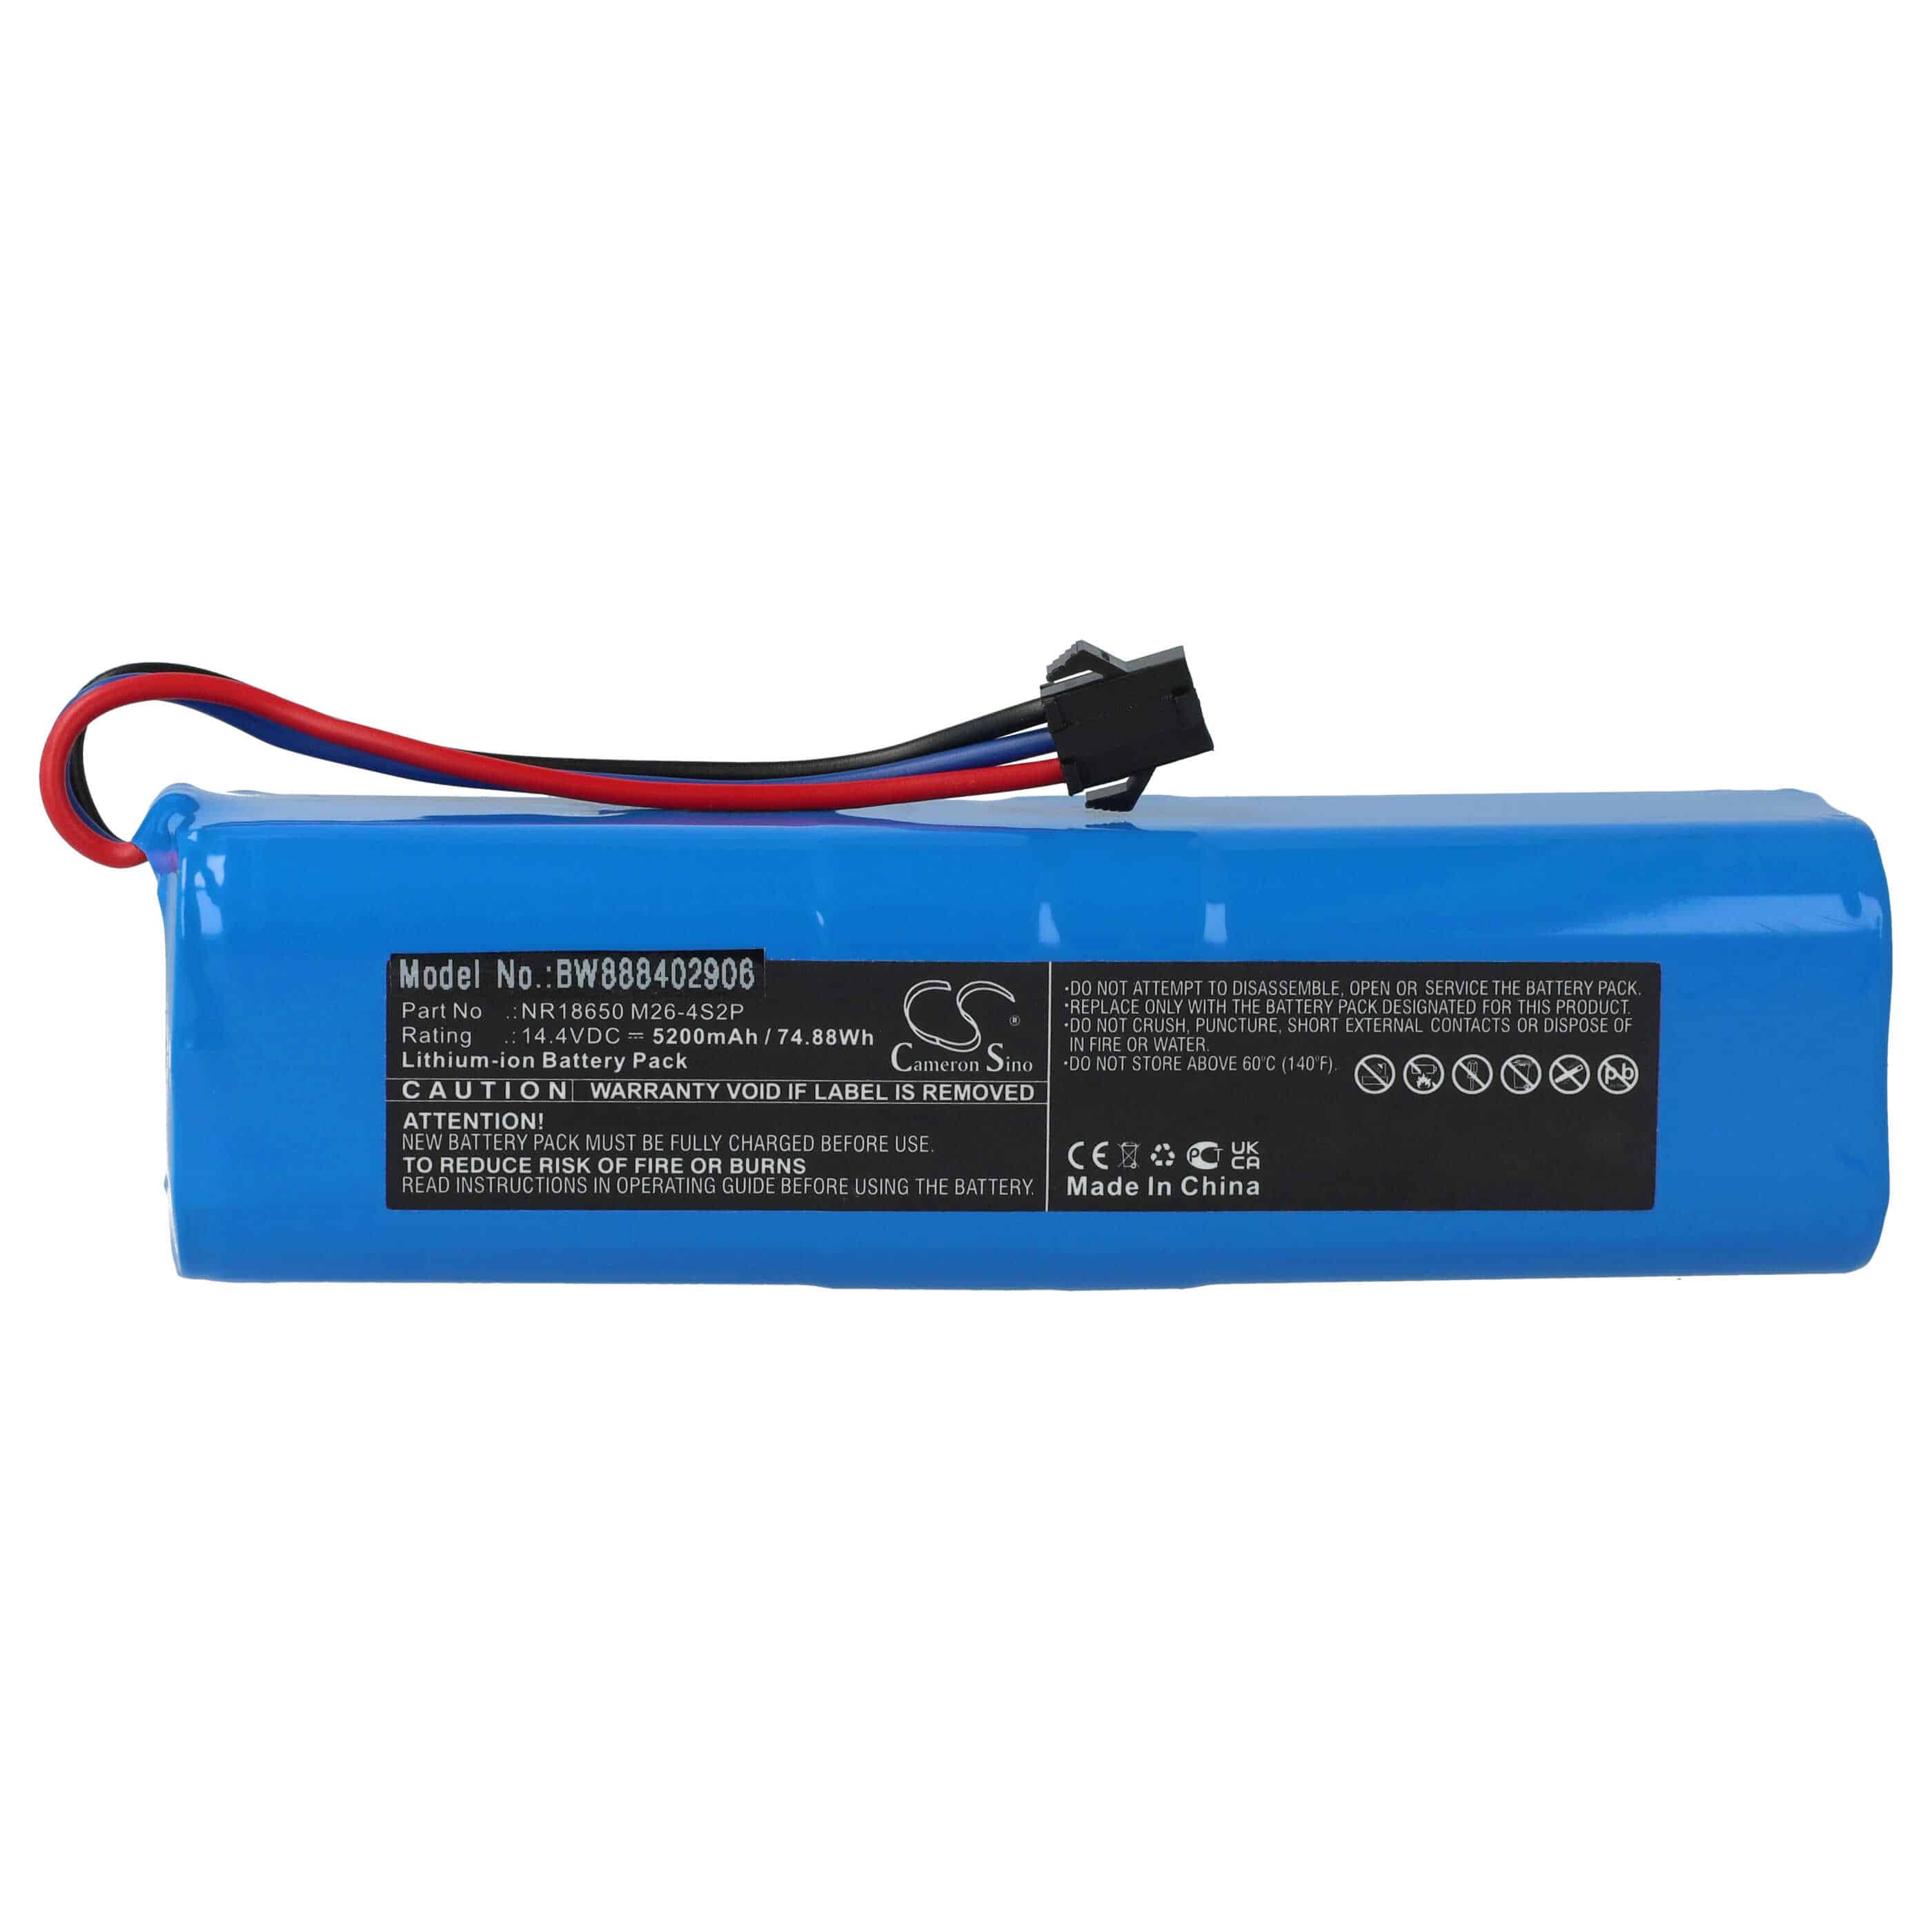 Replacement Battery for Proscenic M7 Pro, M8 Pro, Lydsto R1, Roidmi Eve Plus - 5200mAh, 14.4V, Li-Ion